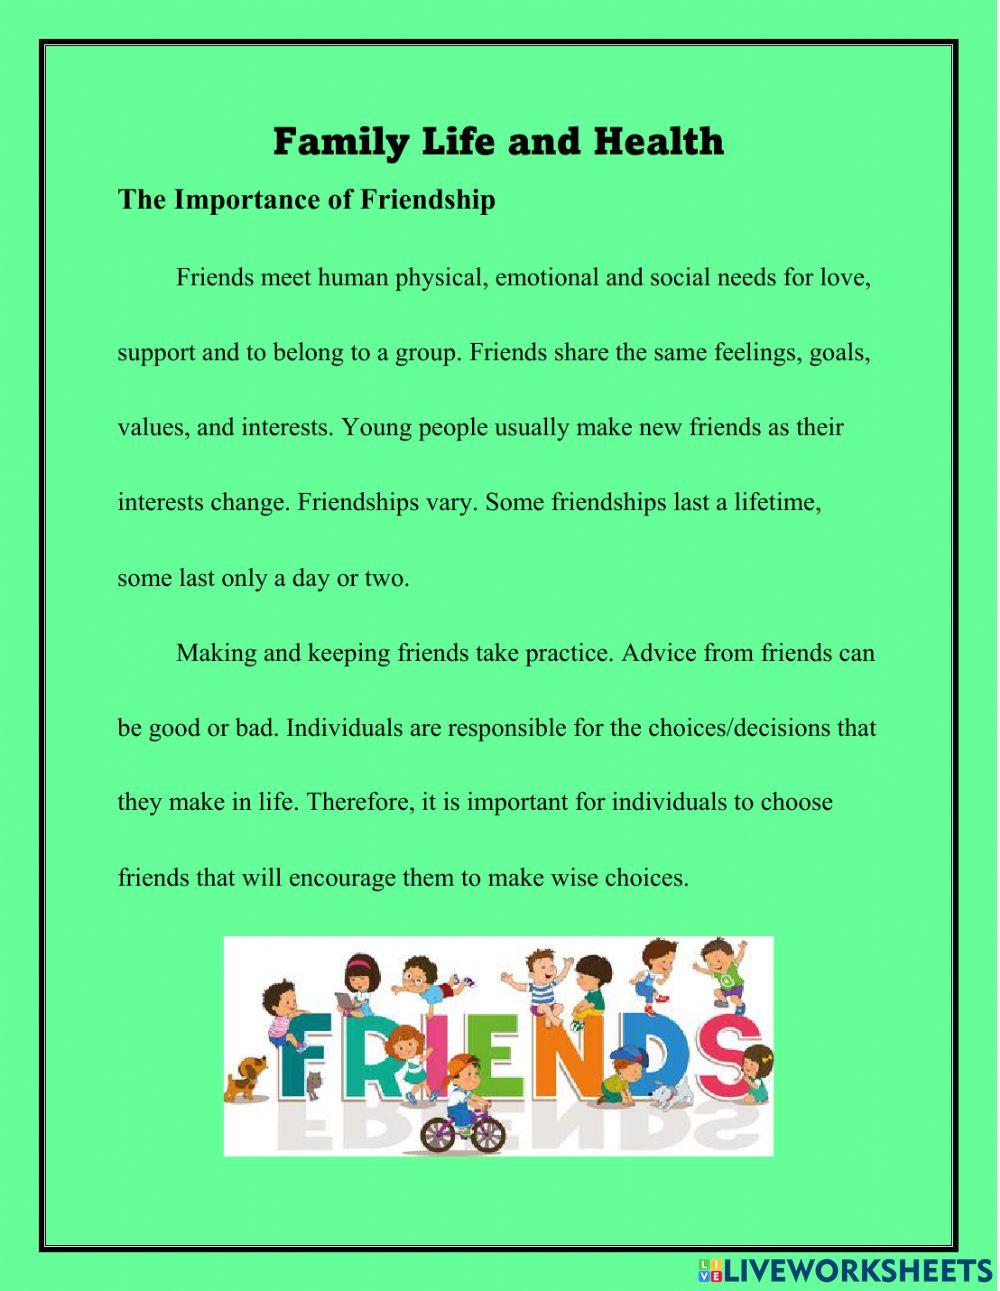 The Importance of Friendship